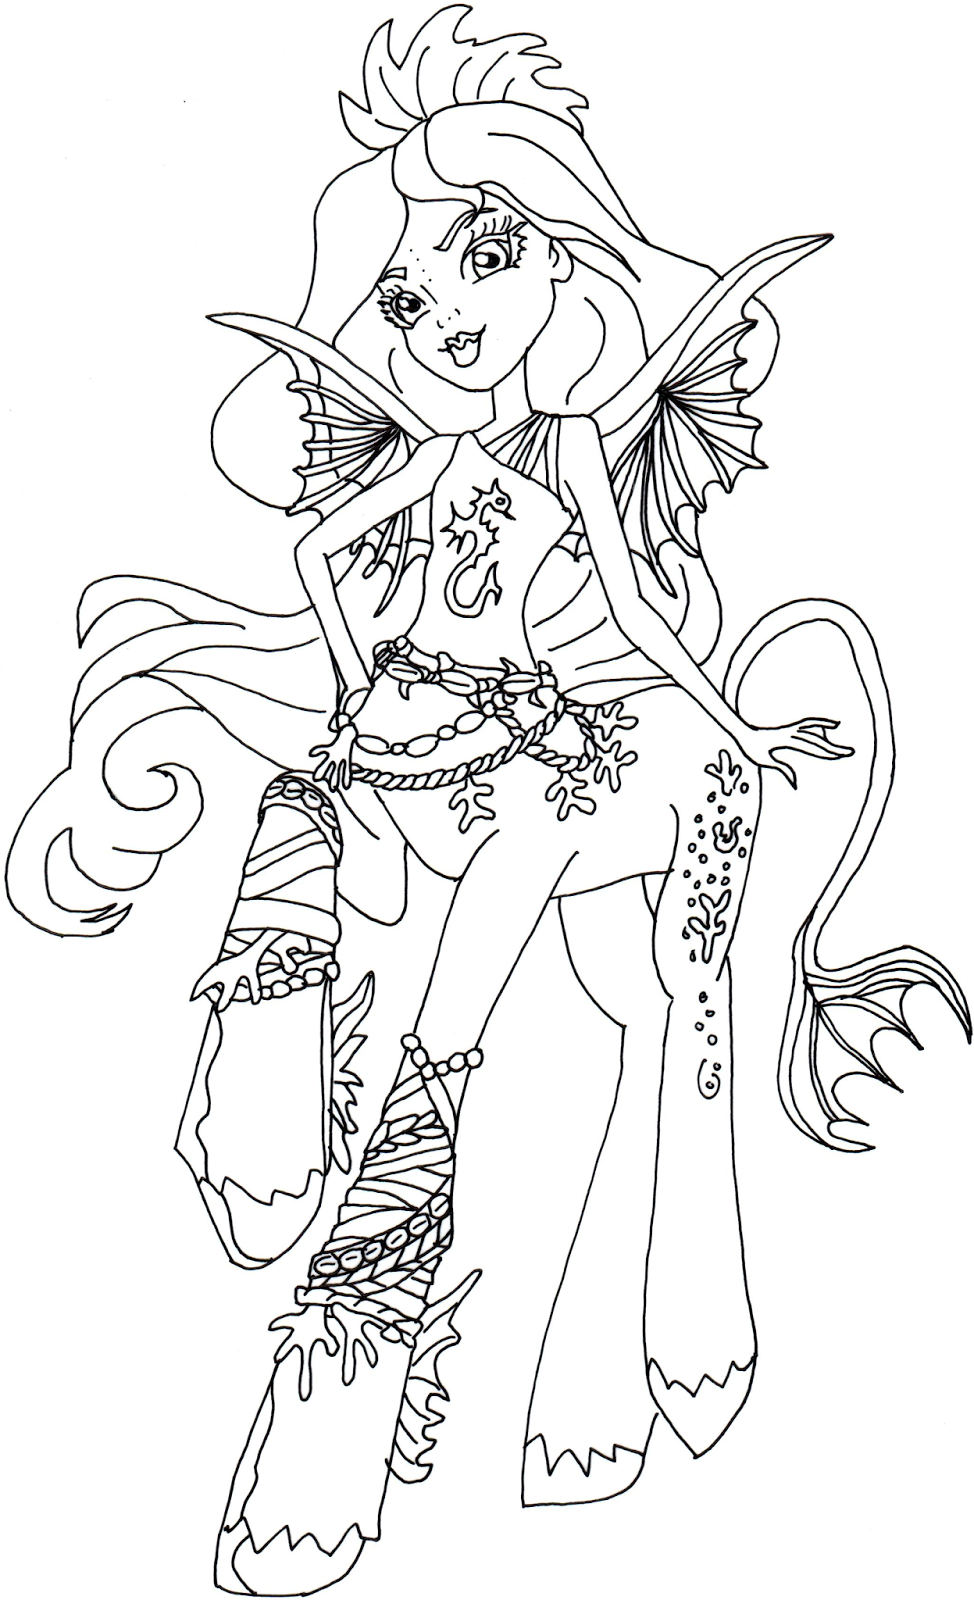 Free Printable Monster High Coloring Pages: Bay Tidechaser Monster High